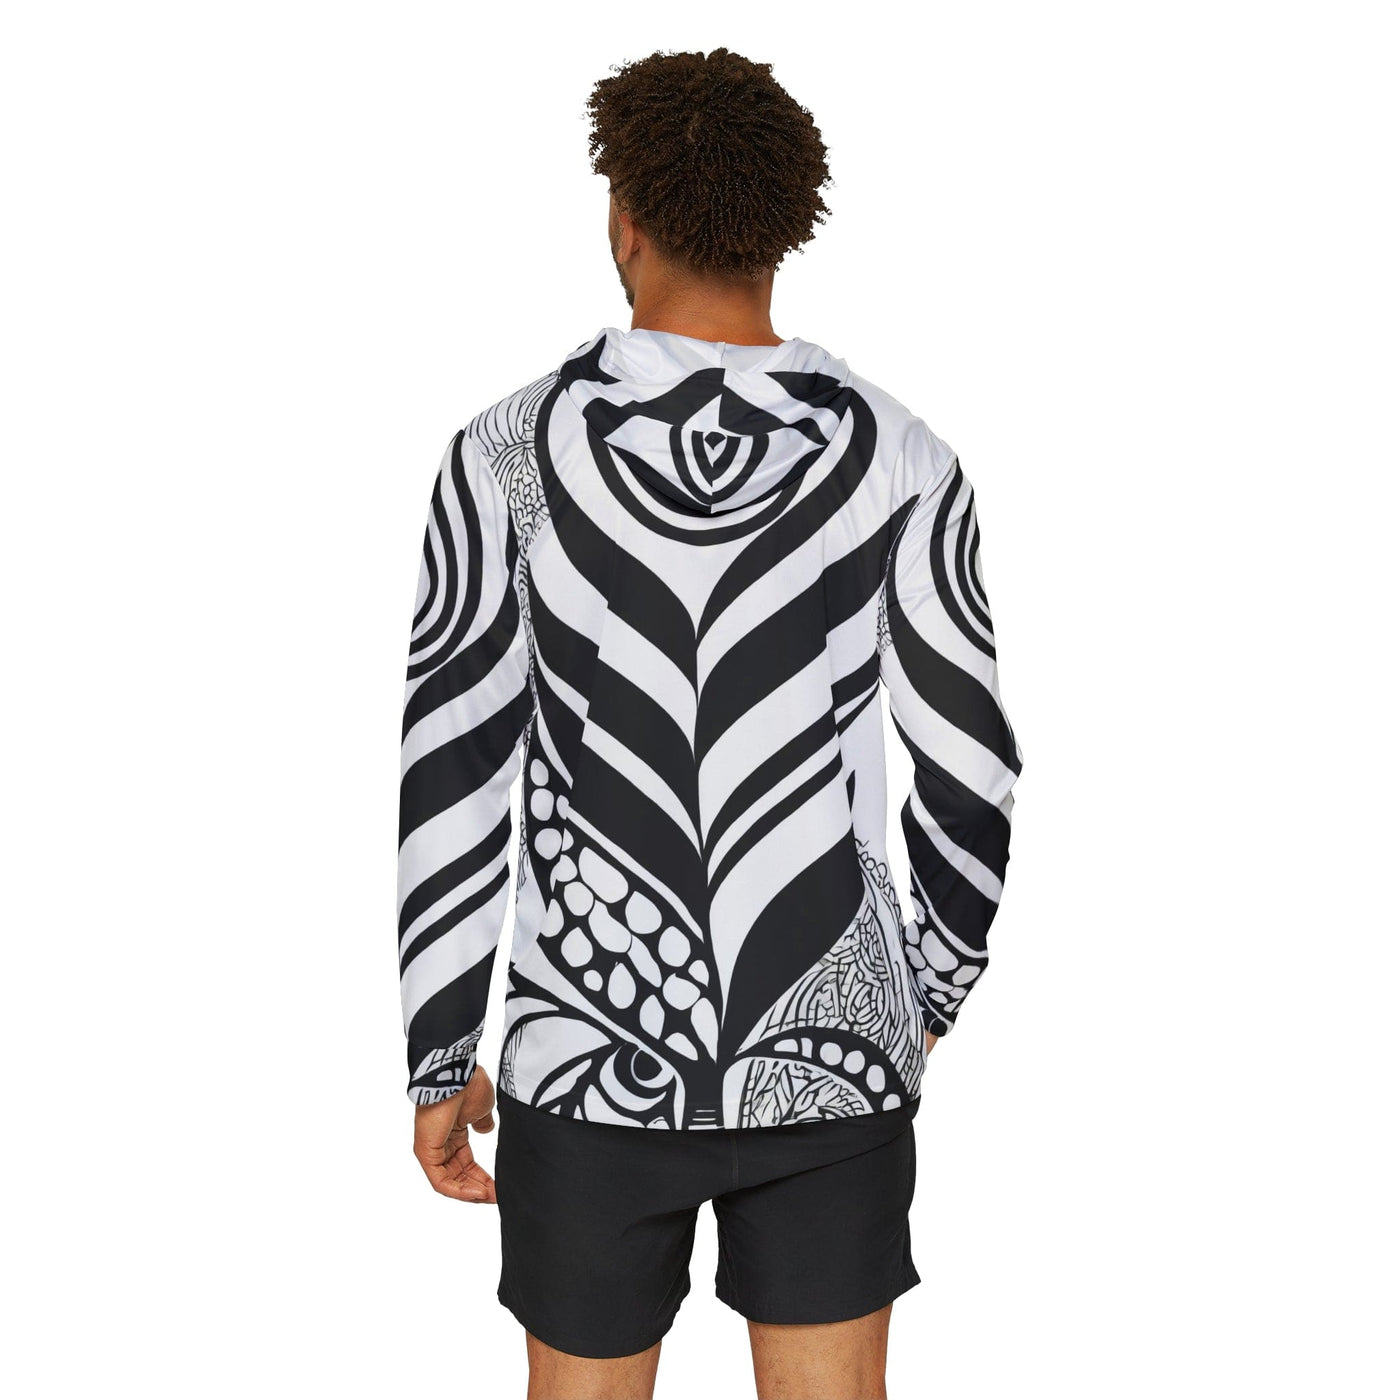 Mens Sports Graphic Hoodie Floral Black Line Art Print 60110 - All Over Prints